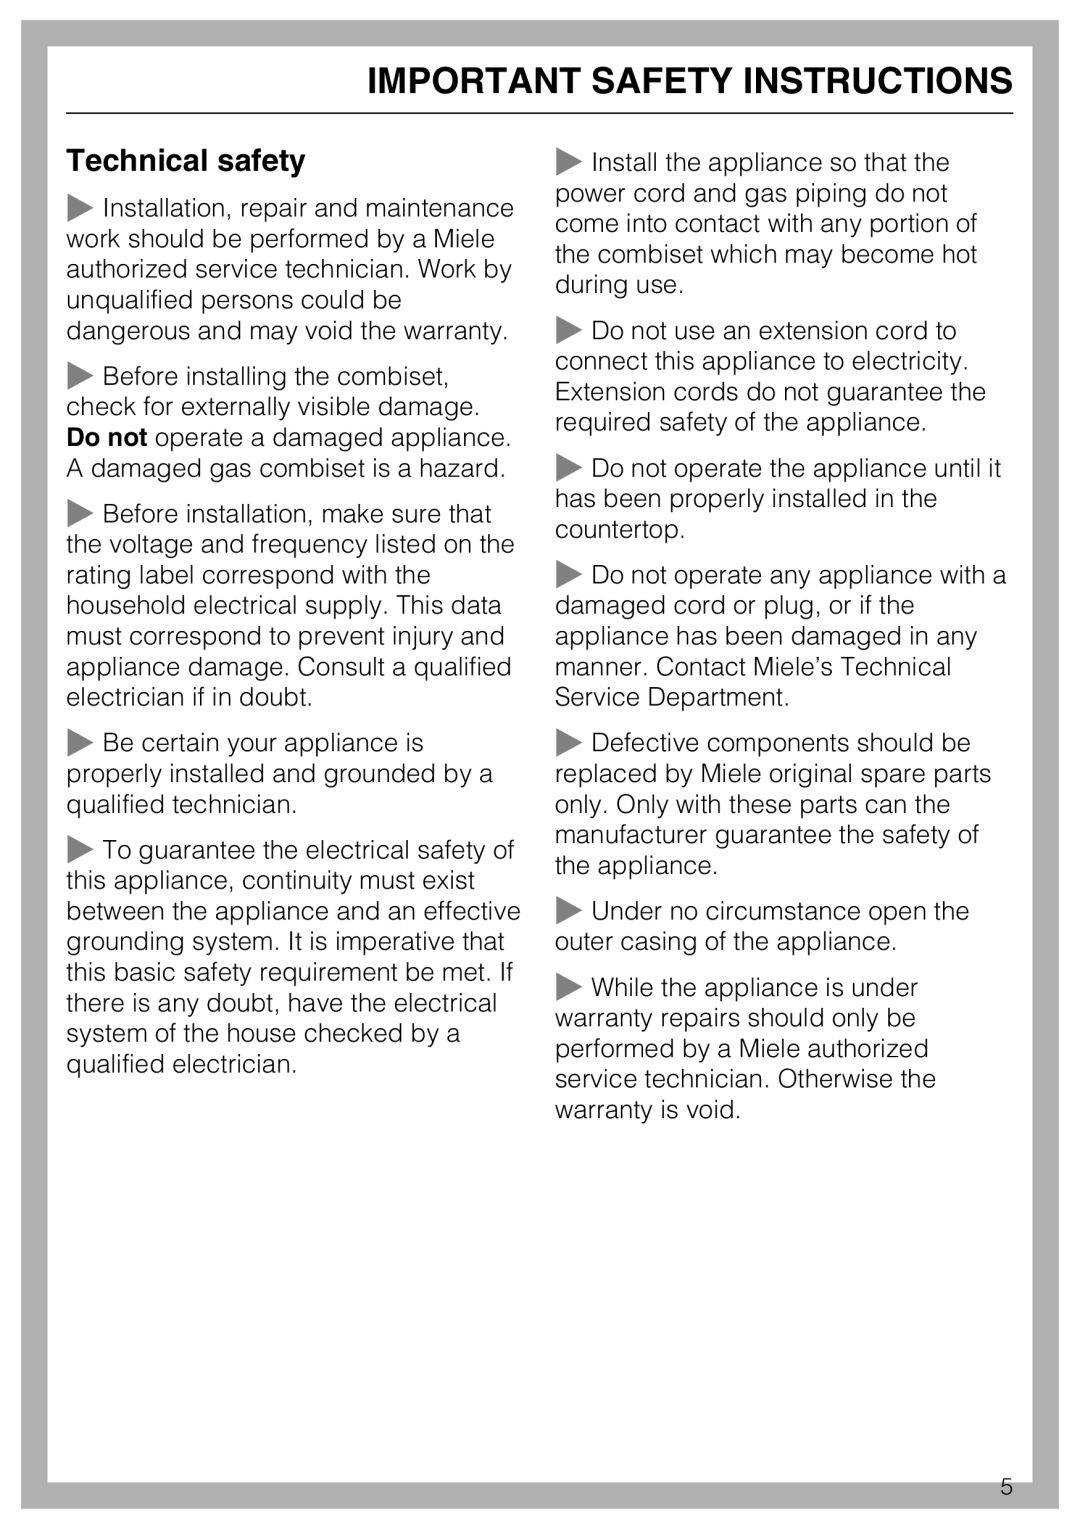 Miele CS1028 installation instructions Technical safety, Important Safety Instructions 